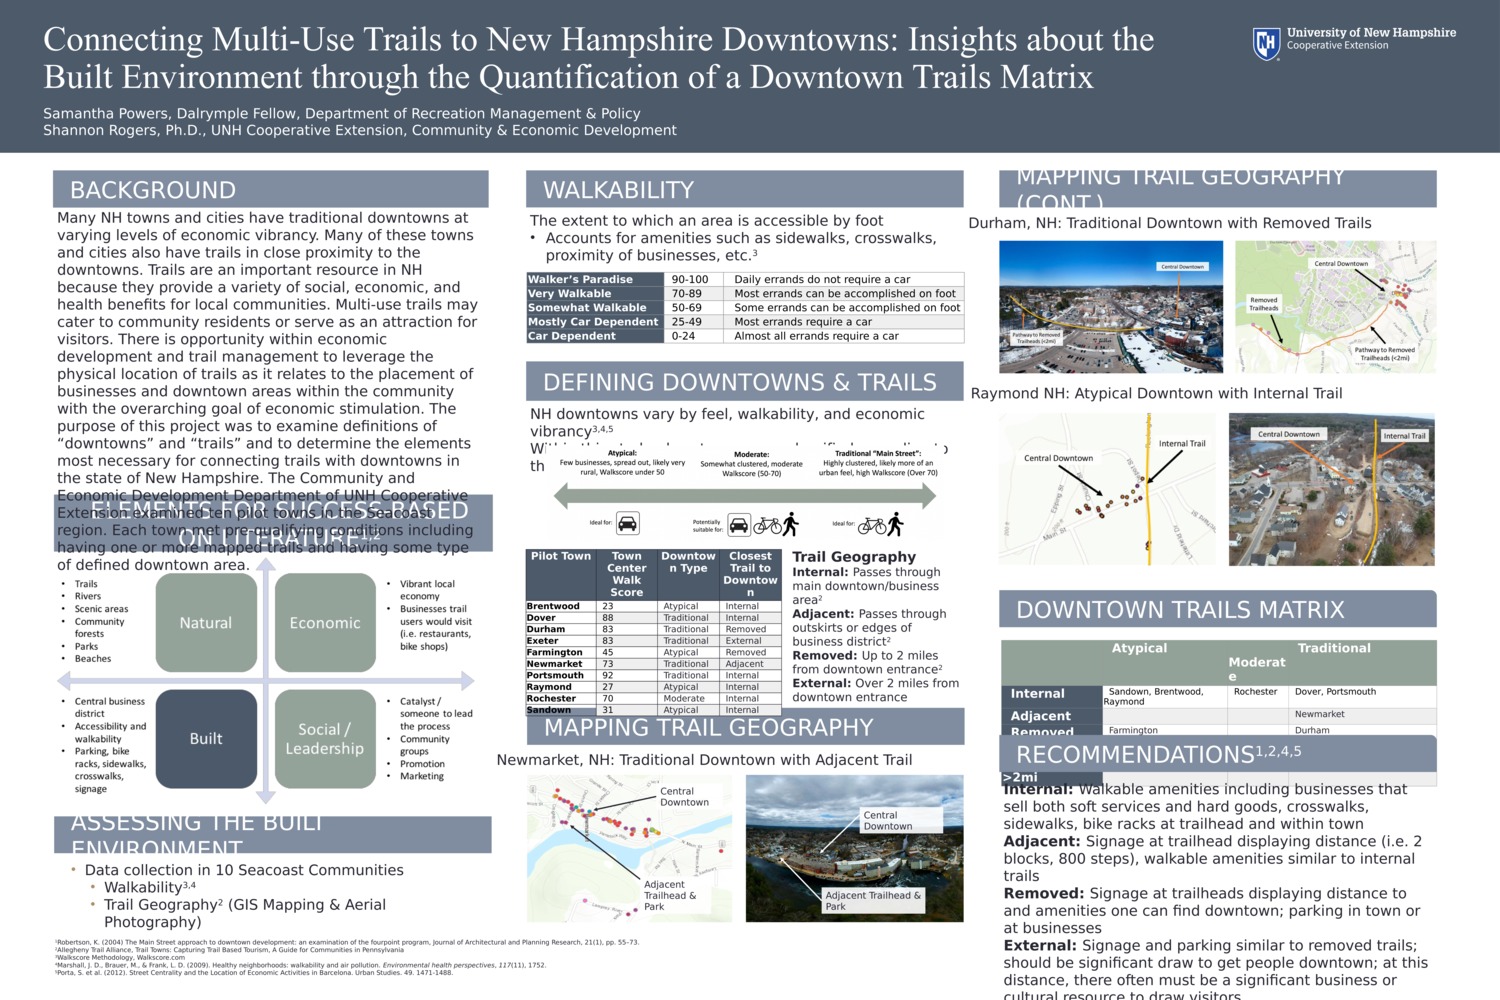 Connecting Multi-Use Trails To New Hampshire Downtowns: Insights About The Built Environment Through The Quantification Of A Downtown Trails Matrix by sld225